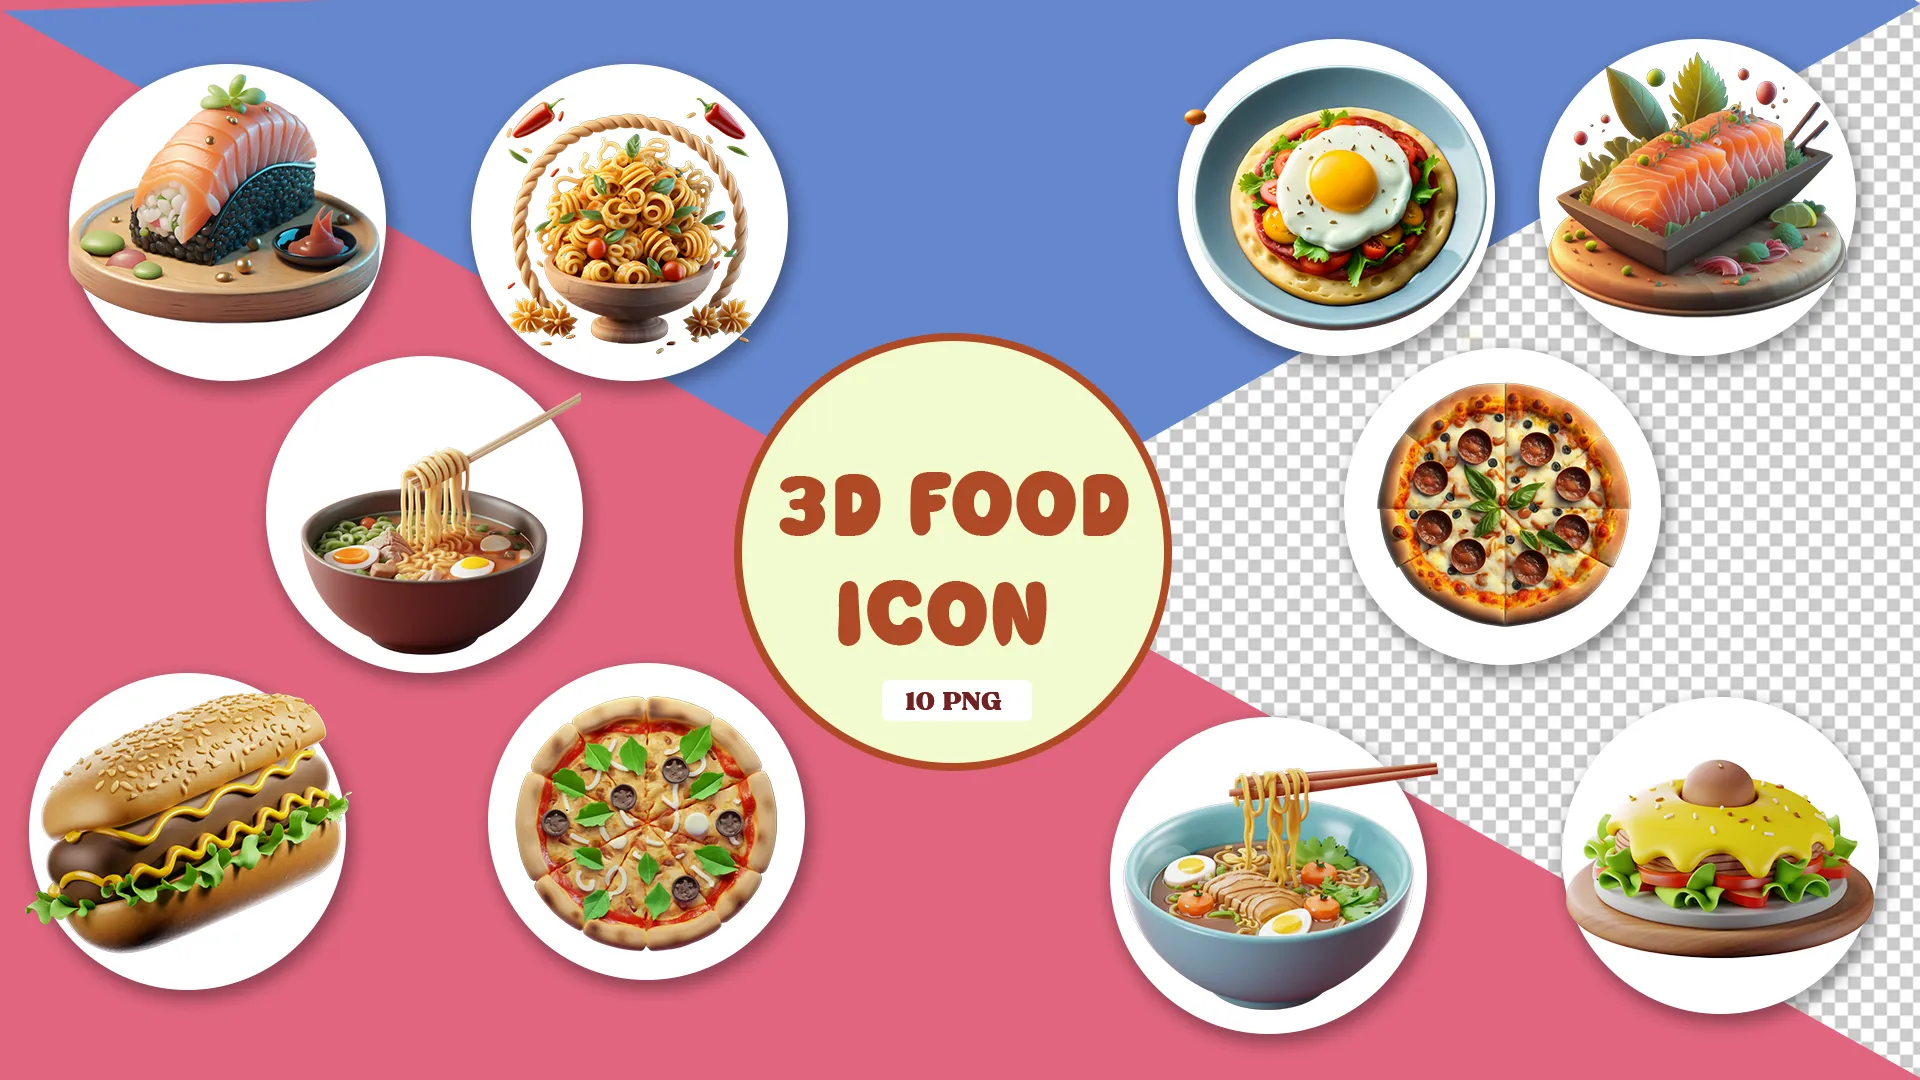 Global Cuisine 3D Food Icons Pack image